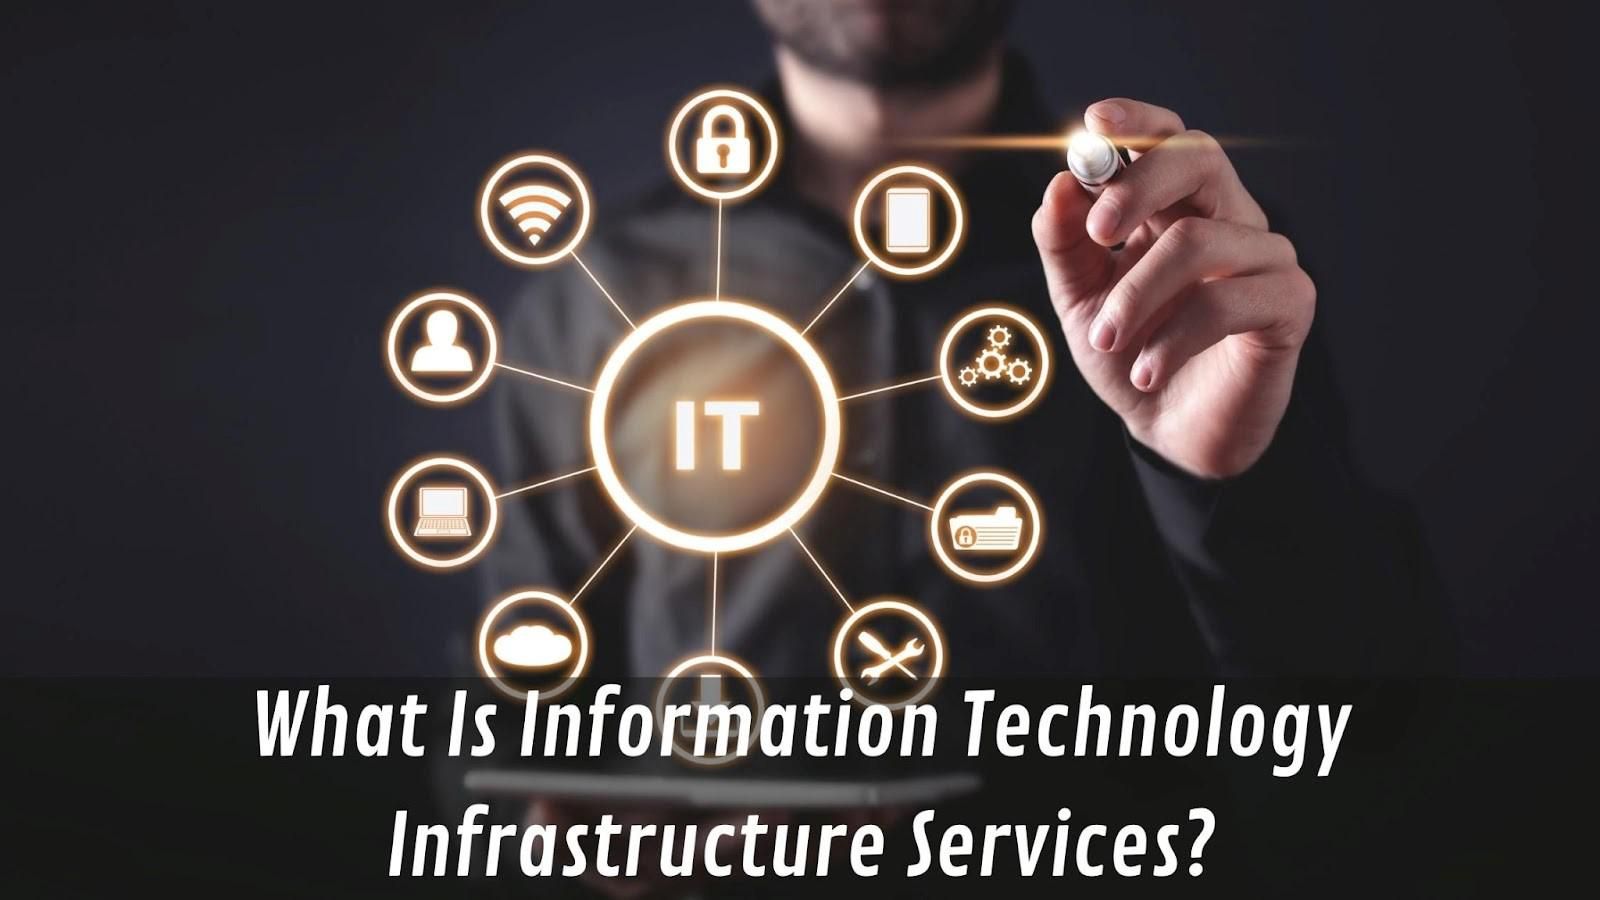 What Are Information Technology Infrastructure Services?